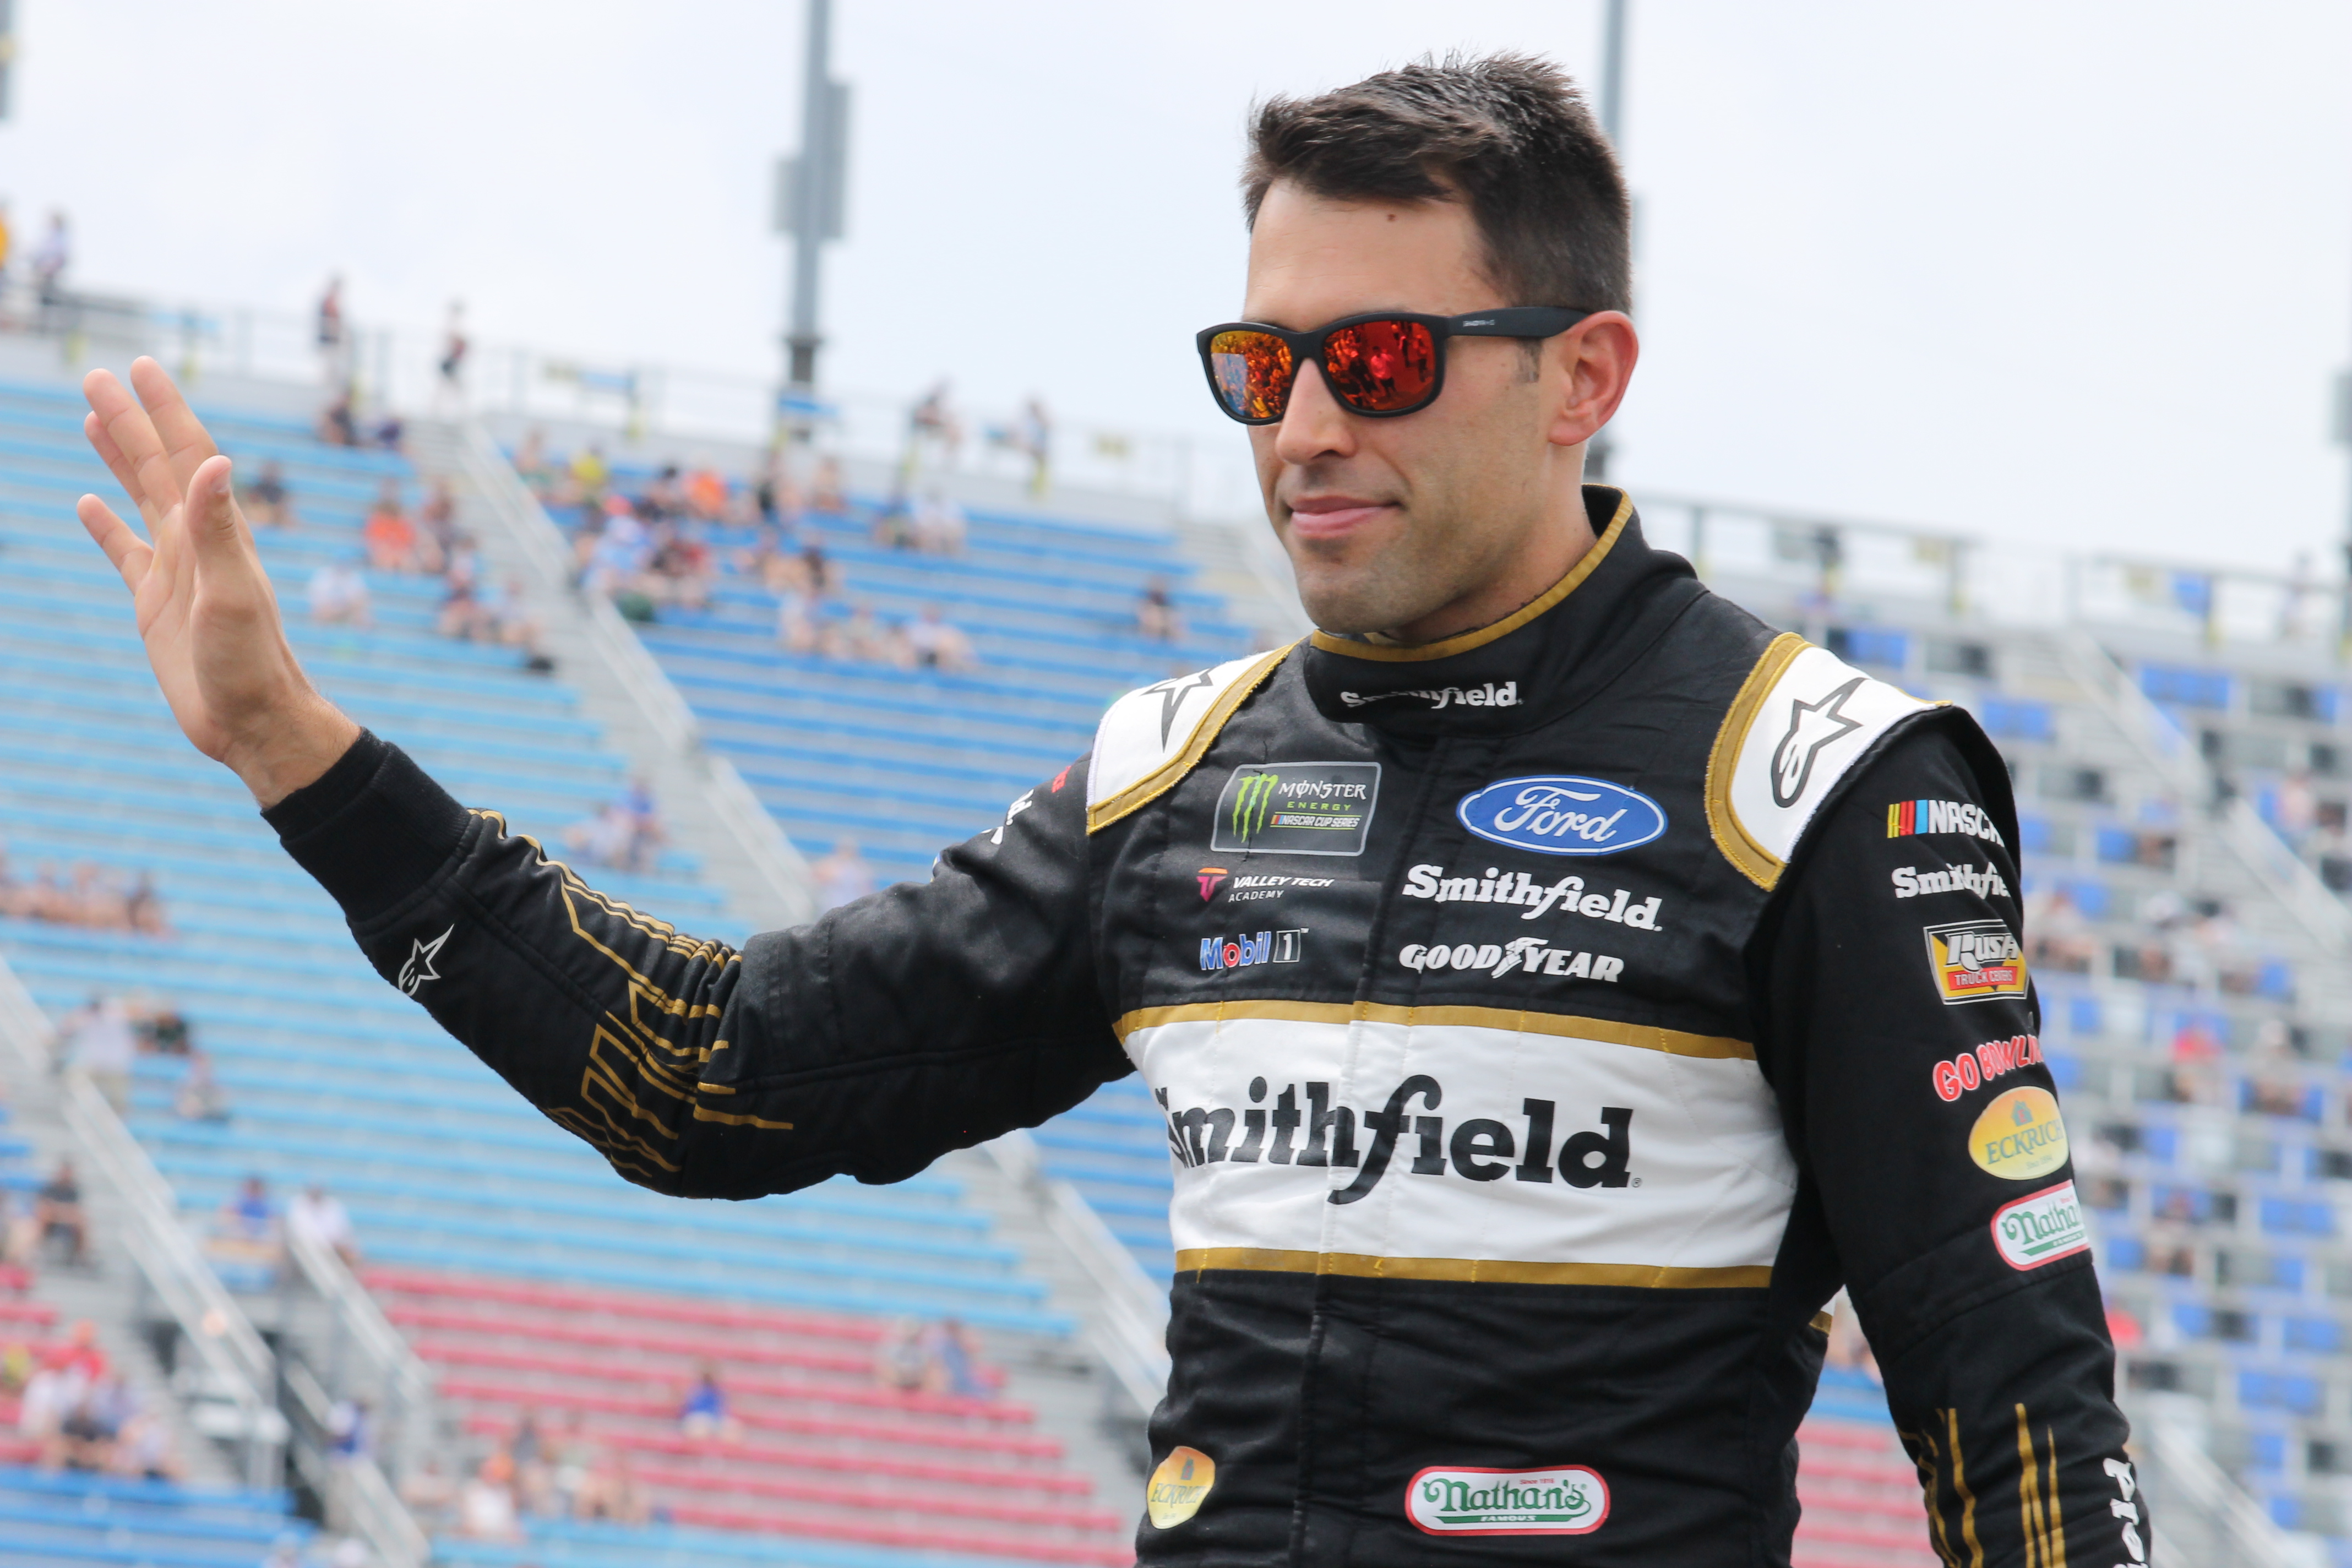 In due time, Almirola's second win with SHR is around the corner. (Photo Credit: Matteo Marcheschi/TPF)